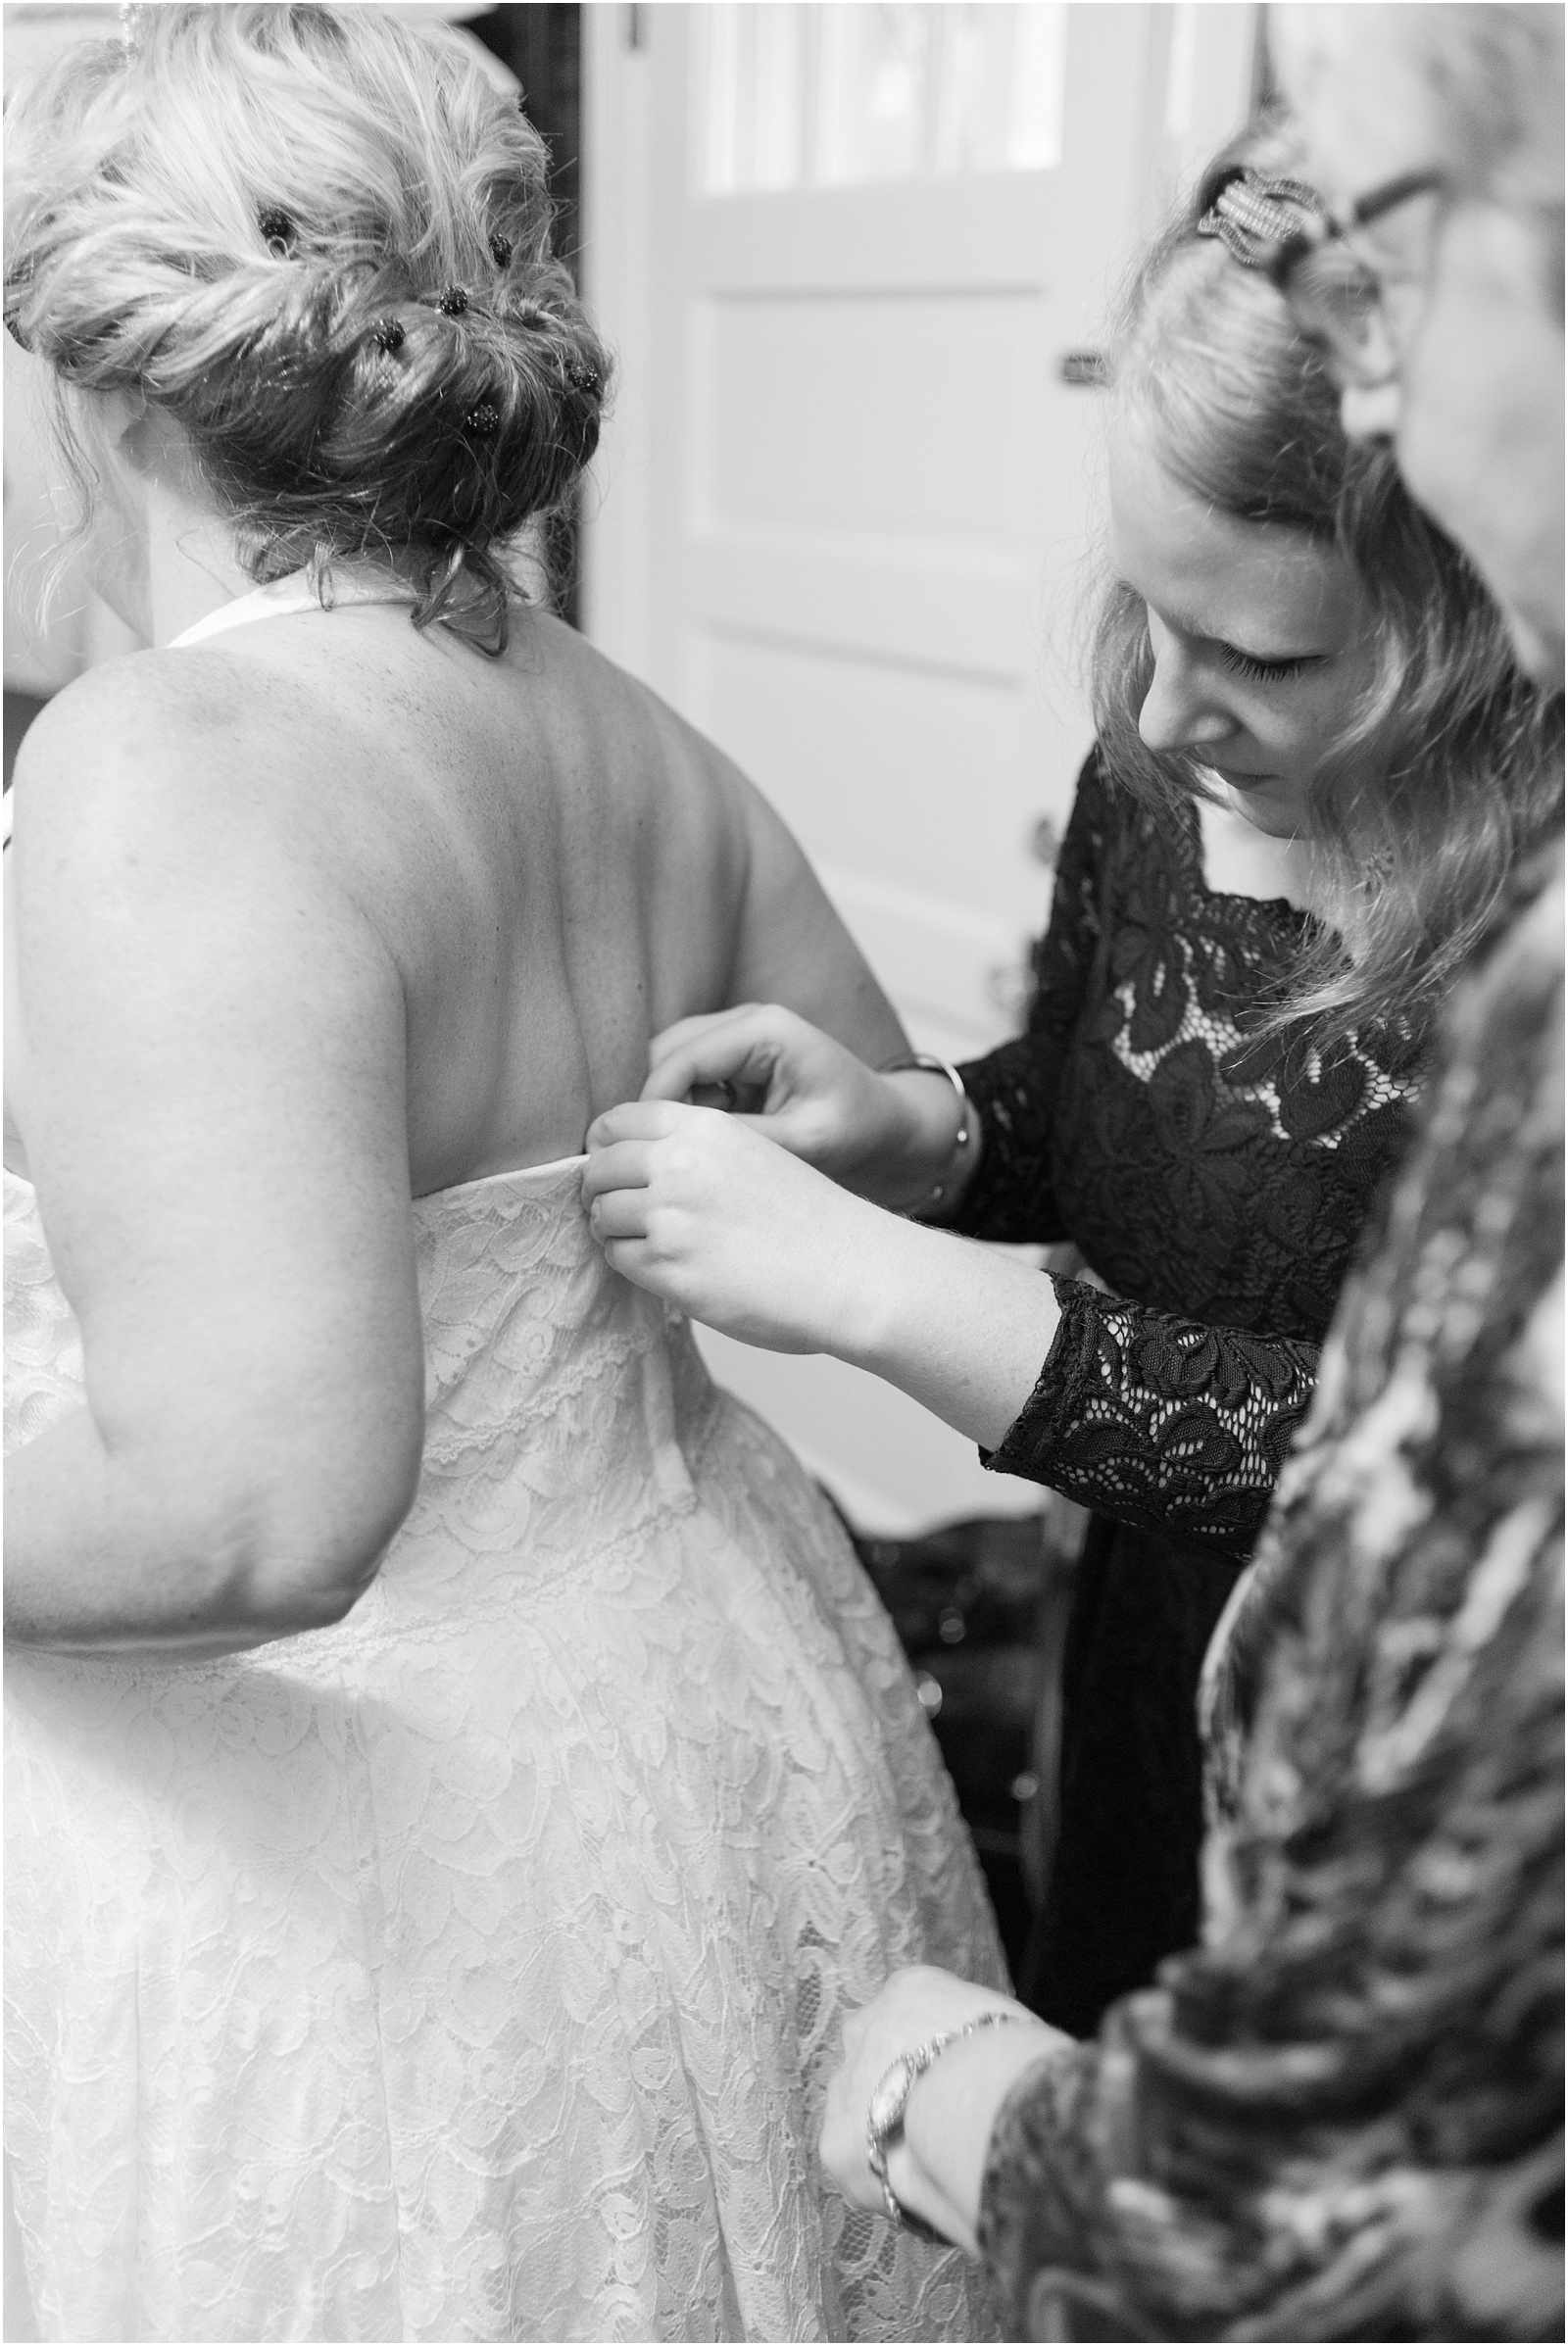 Michelle and Sara Photography, Michelle and Sara weddings, michelle robinson photography, burke manor inn, getting ready, bride putting on dress,